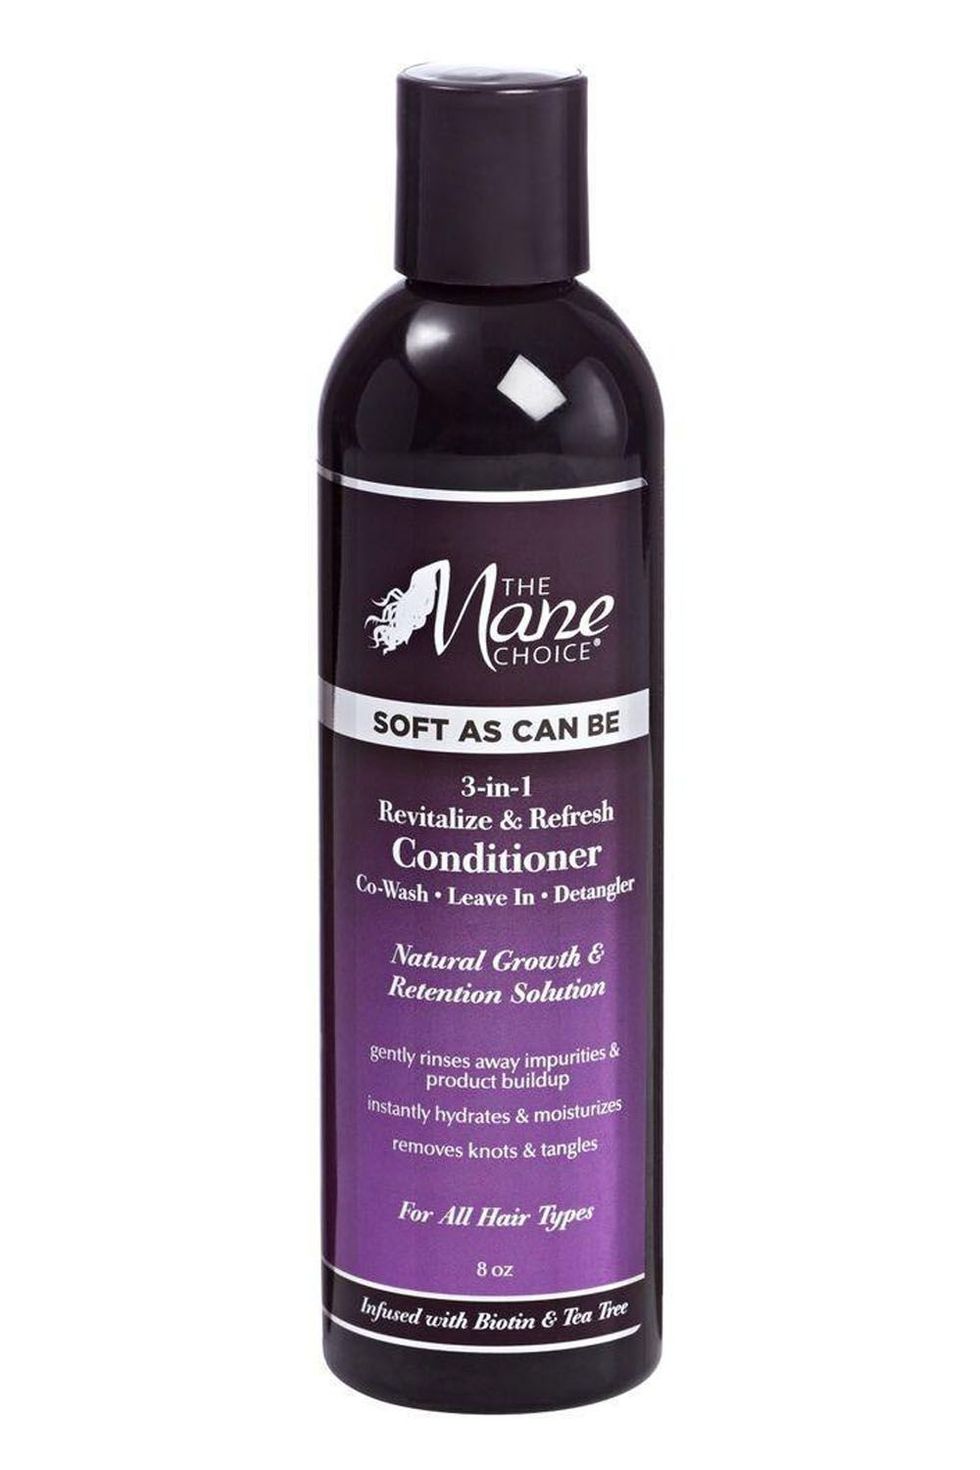 The Mane Choice Soft As Can Be Revitalize & Refresh 3-in-1